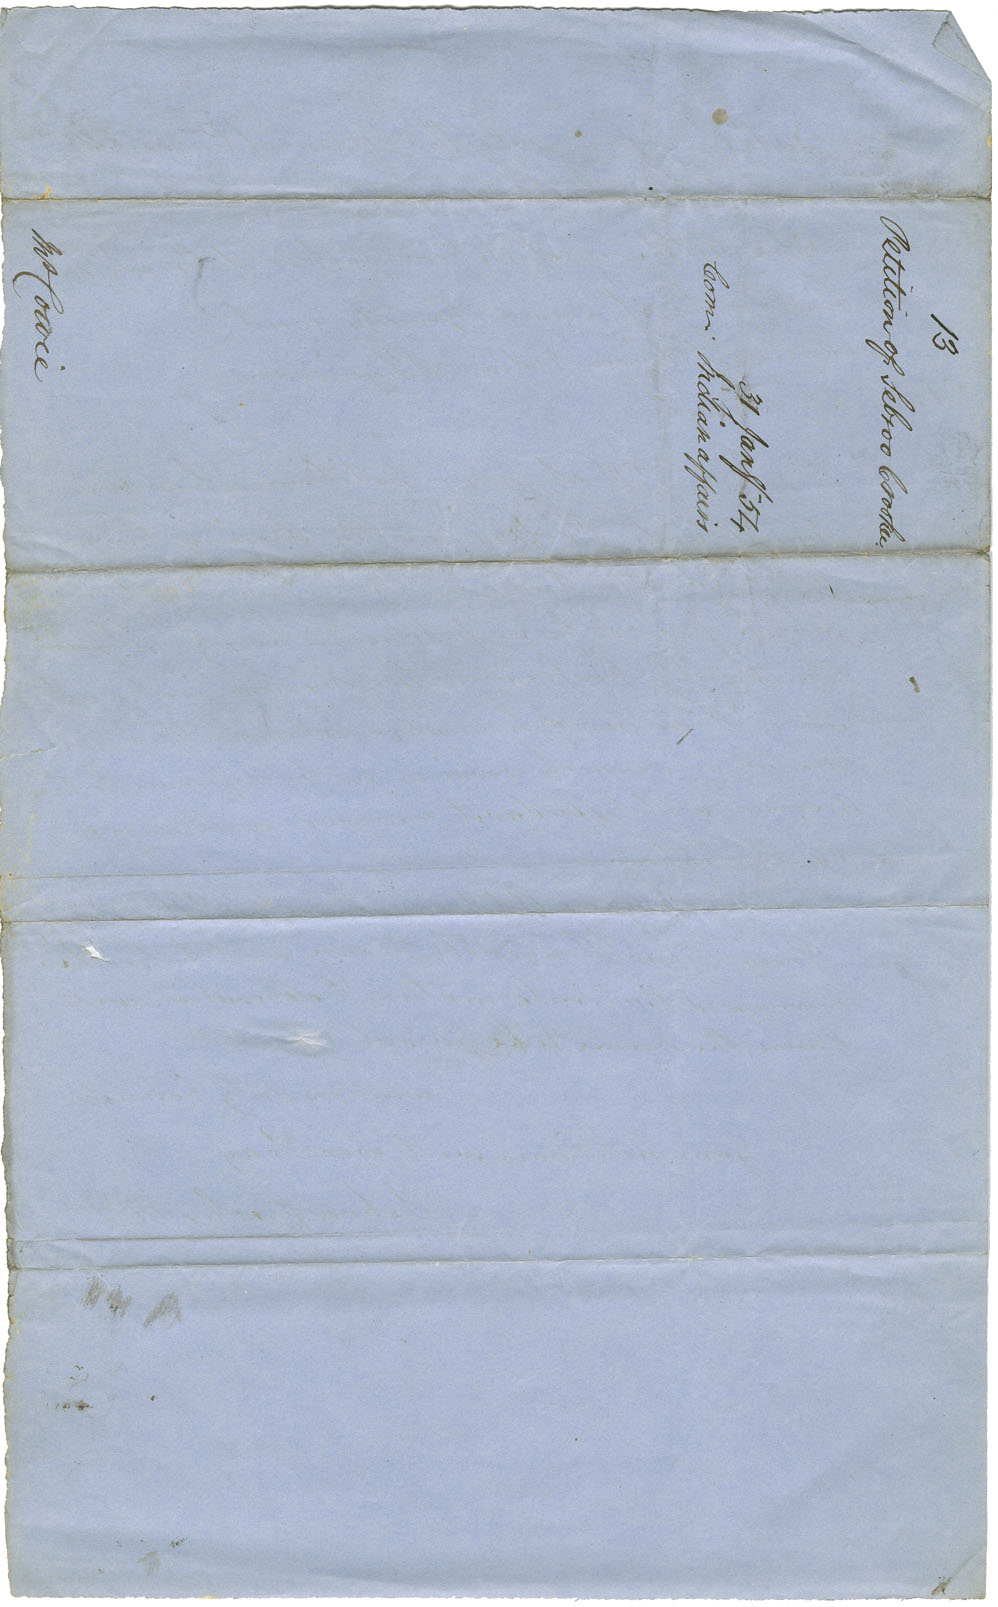 Petition of Dr. Crooker of Brookfield, Queens county, for payments for services to sick Mi'kmaq, with supporting letter from the Overseers of the Poor for the county.